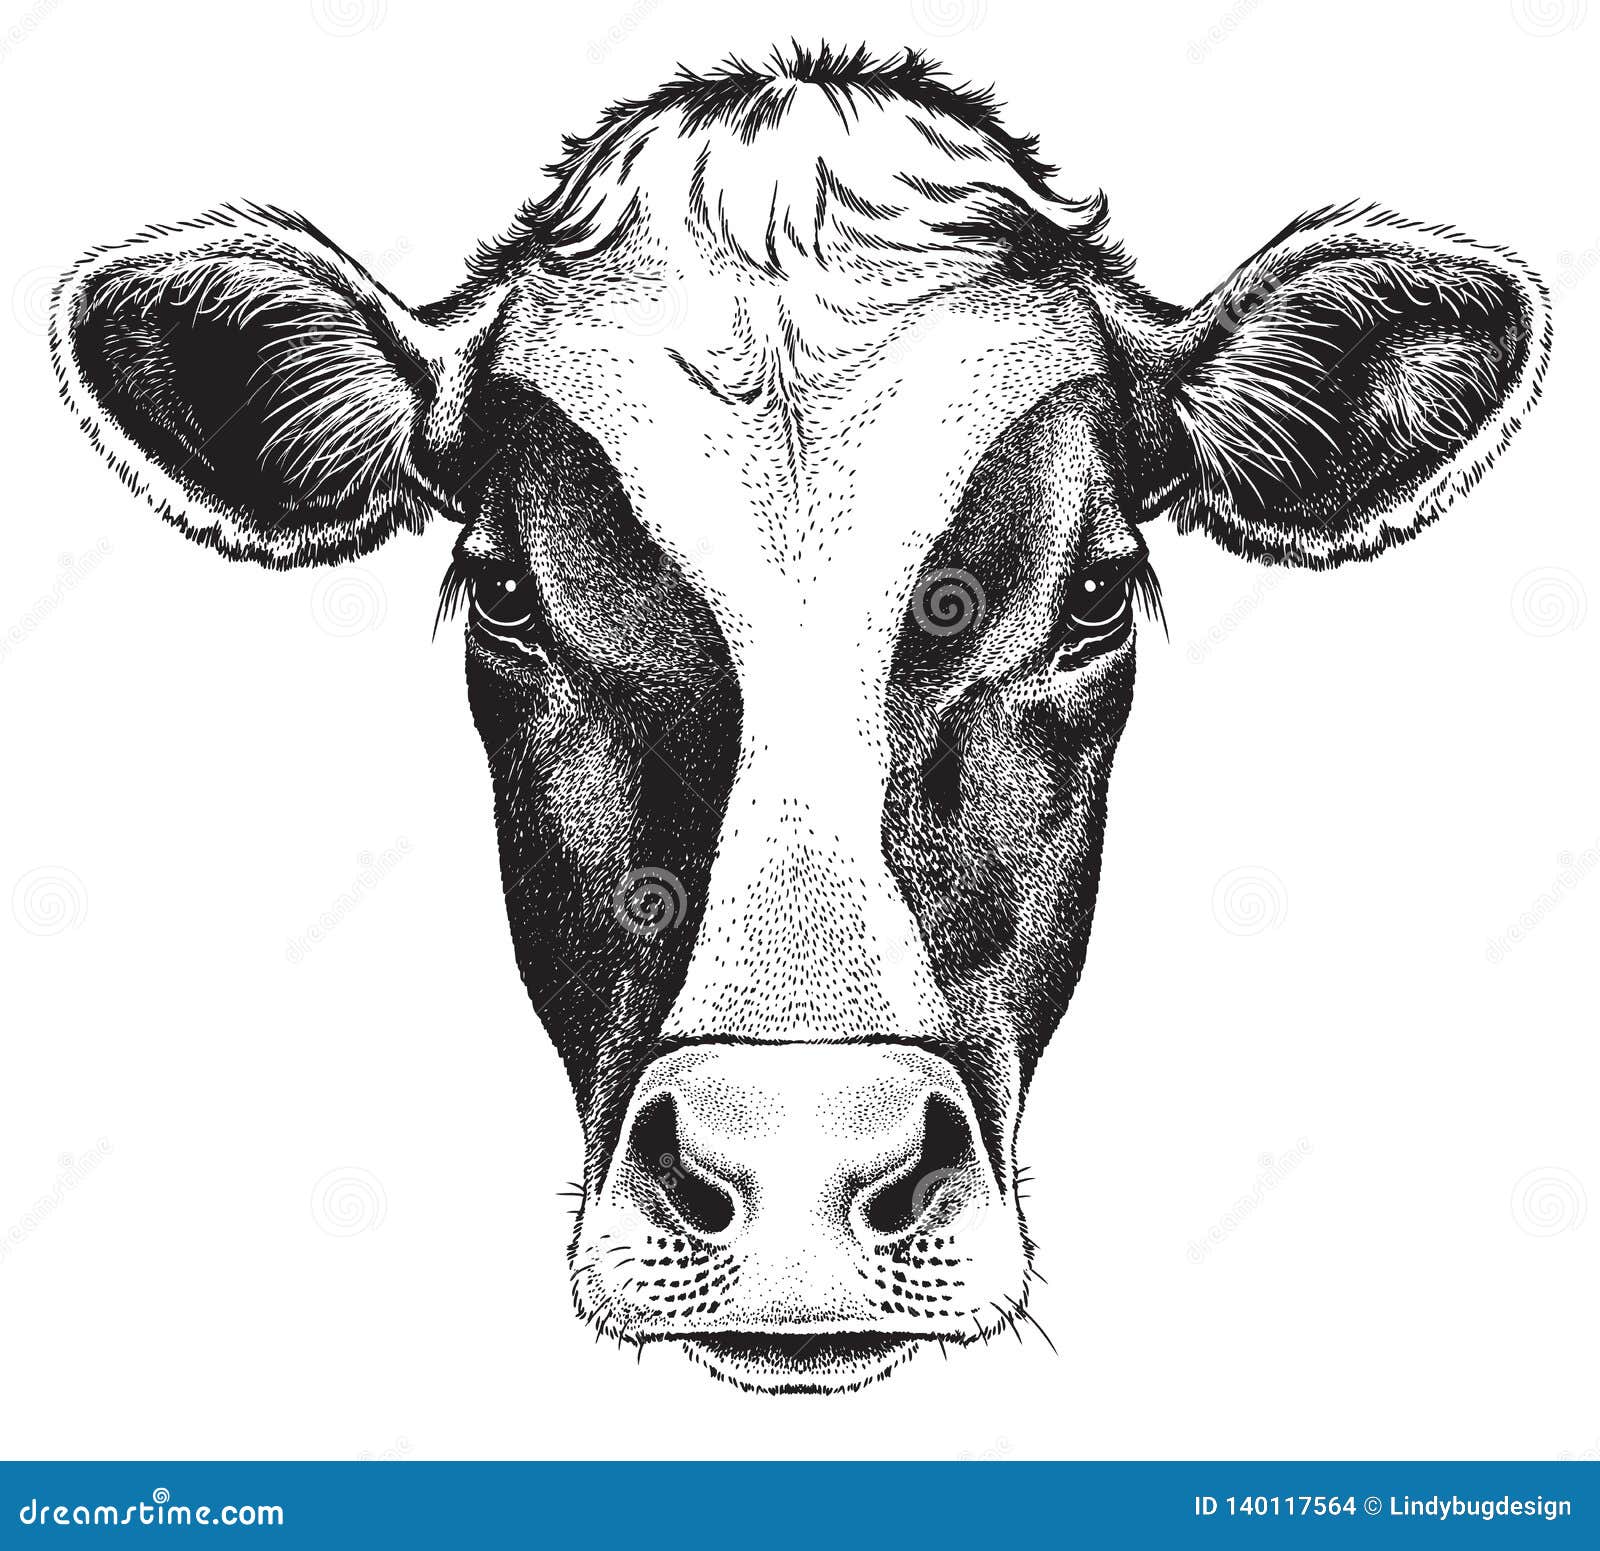 12 Best cow sketch ideas | cow painting, cow art, cow-gemektower.com.vn